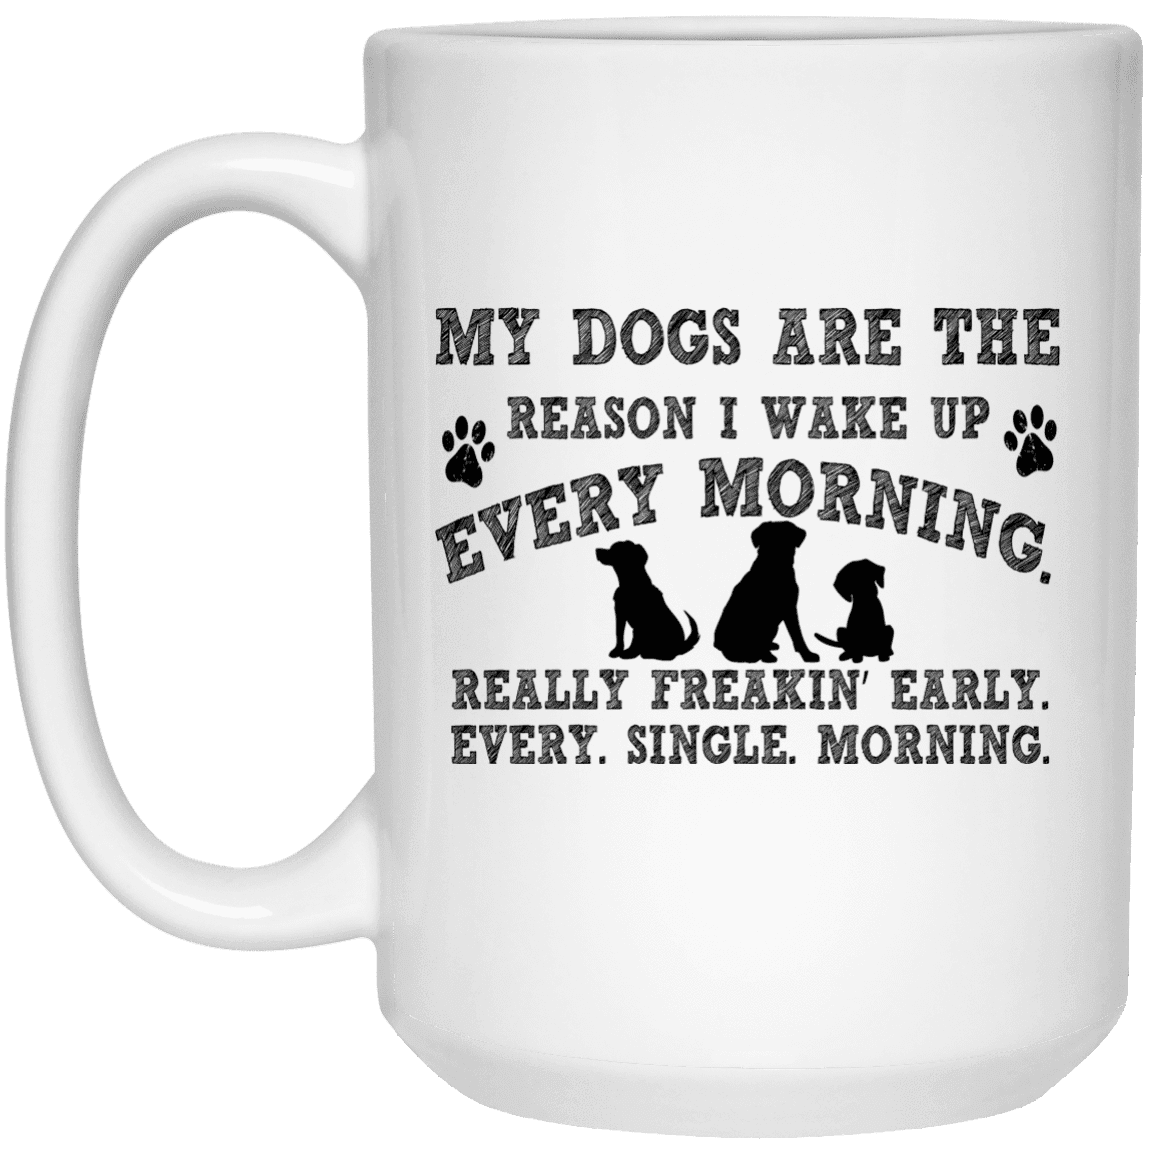 My Dogs Are The Reason - Mugs.